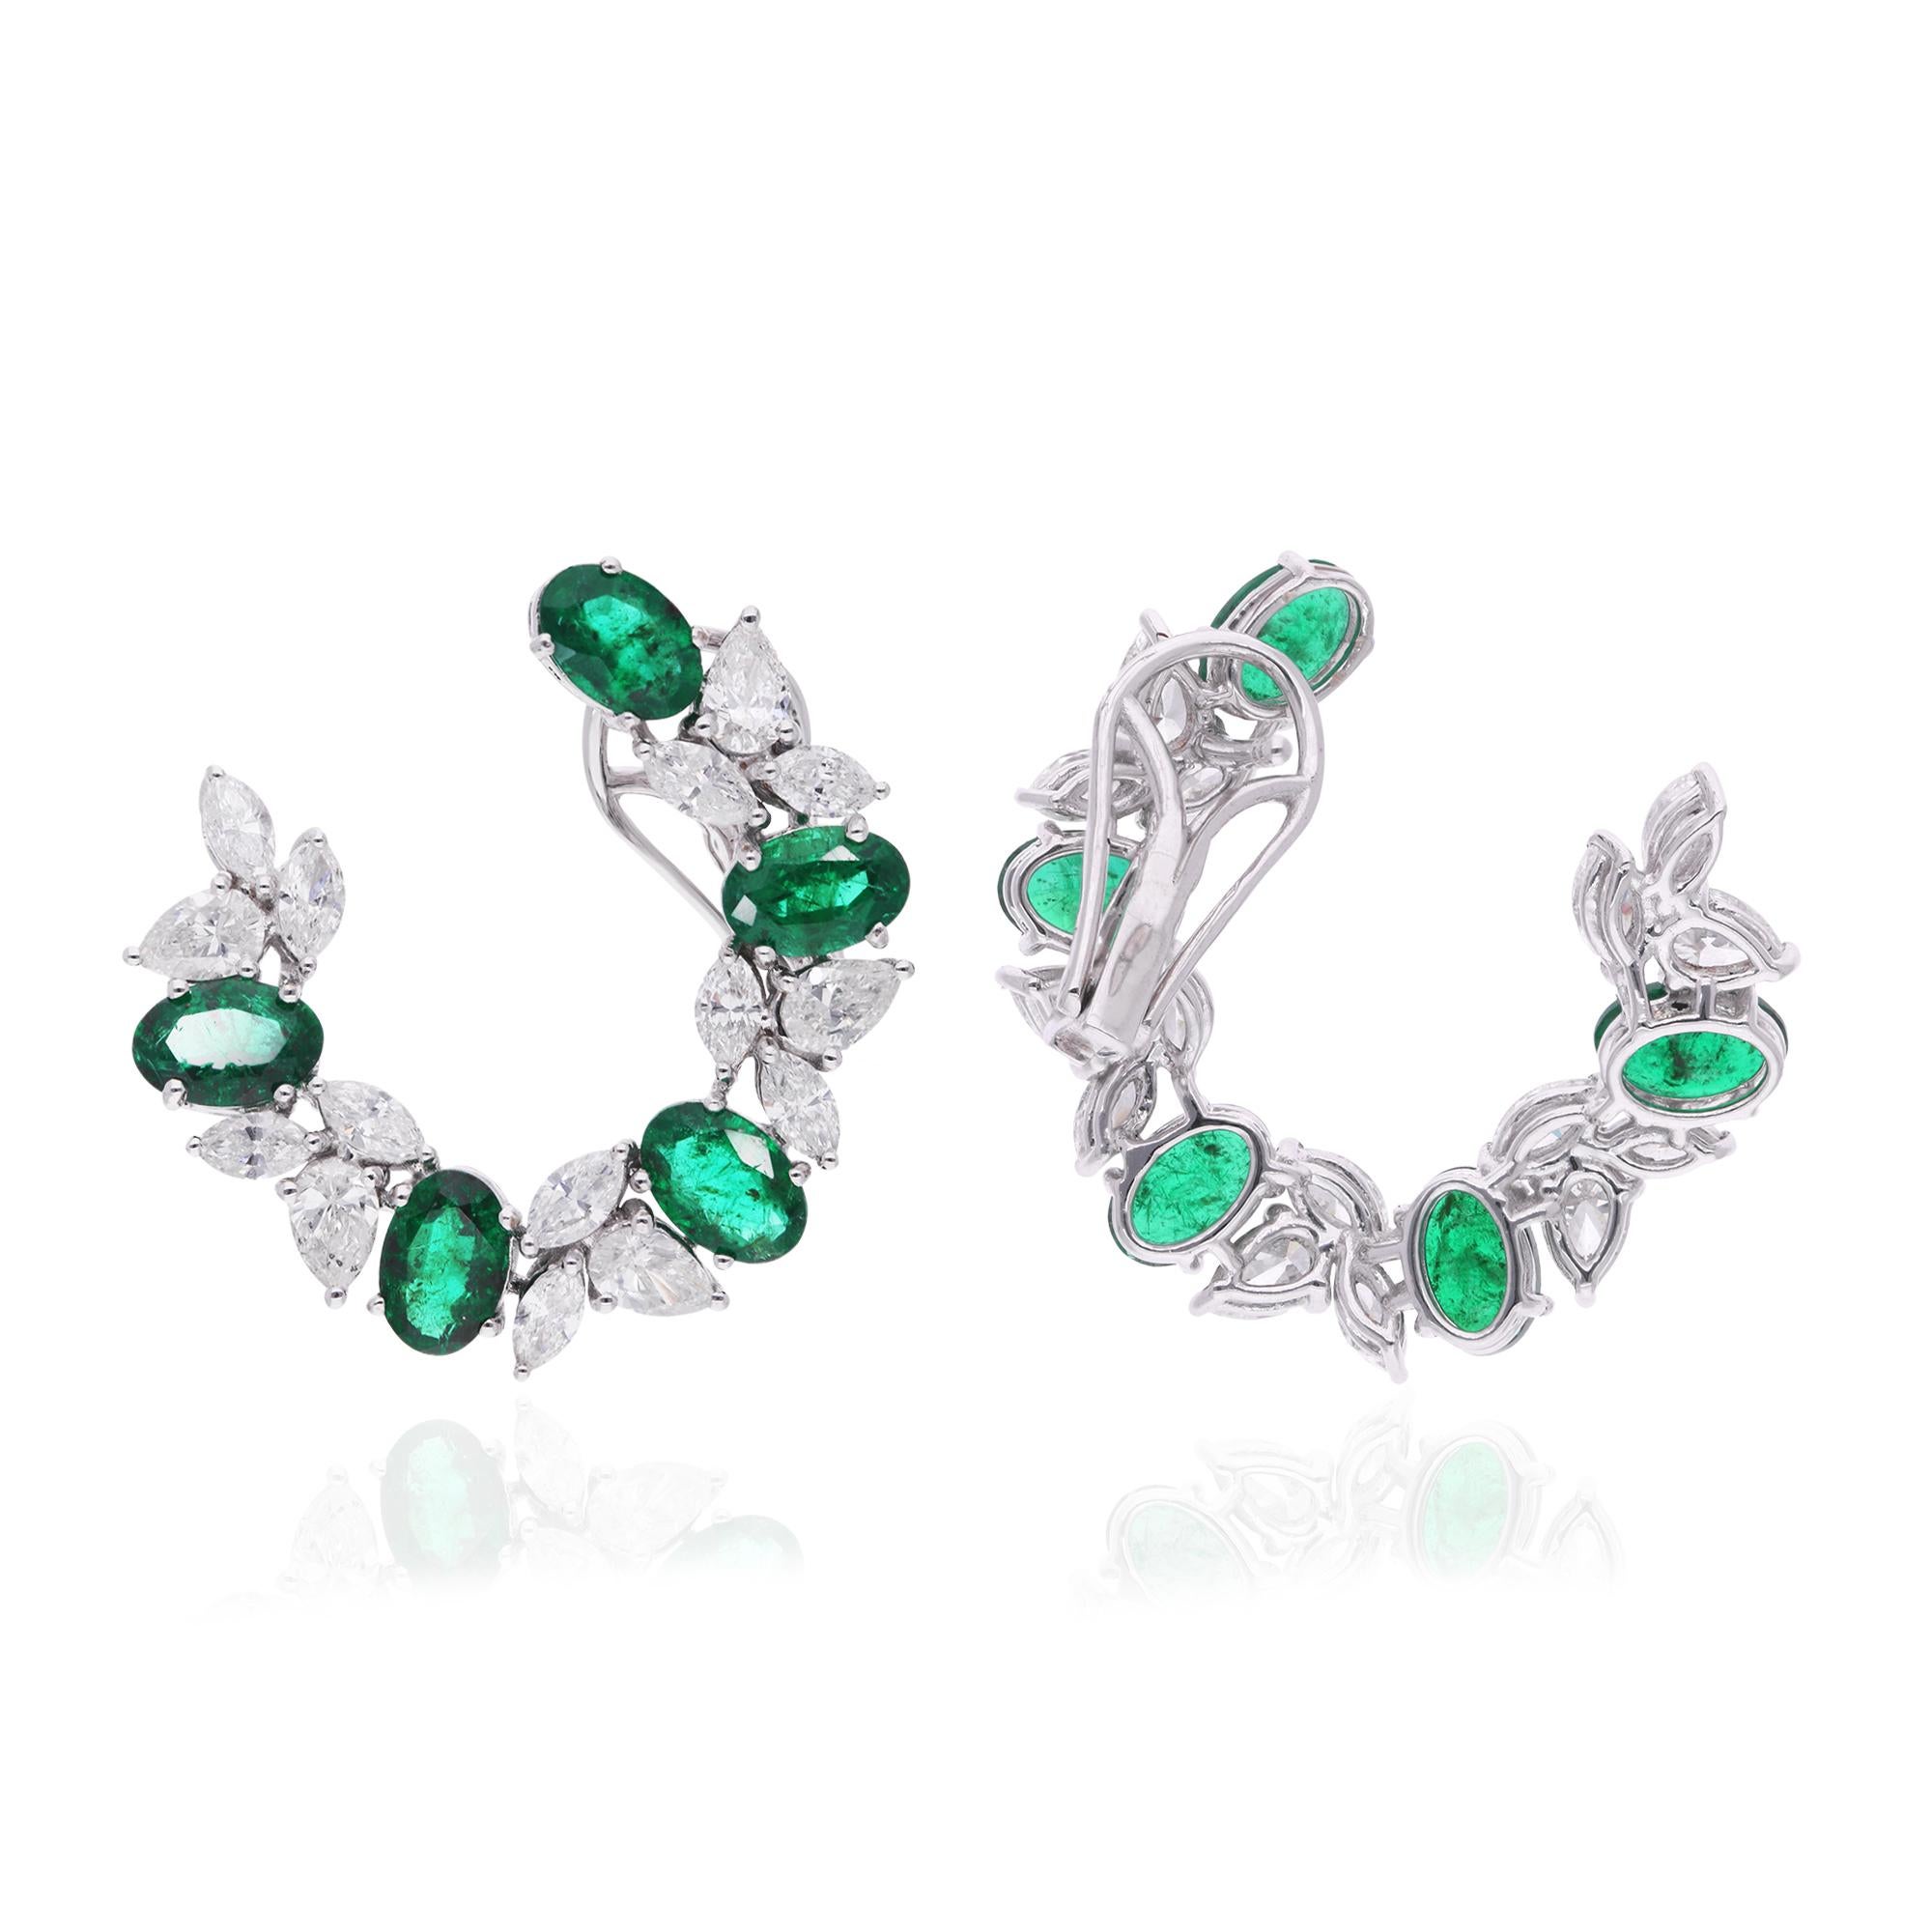 The oval-shaped emerald gemstones take center stage, radiating with vibrant color and brilliance. They are elegantly complemented by sparkling diamonds, meticulously set along the hoops to enhance their allure and add a touch of glamour to the